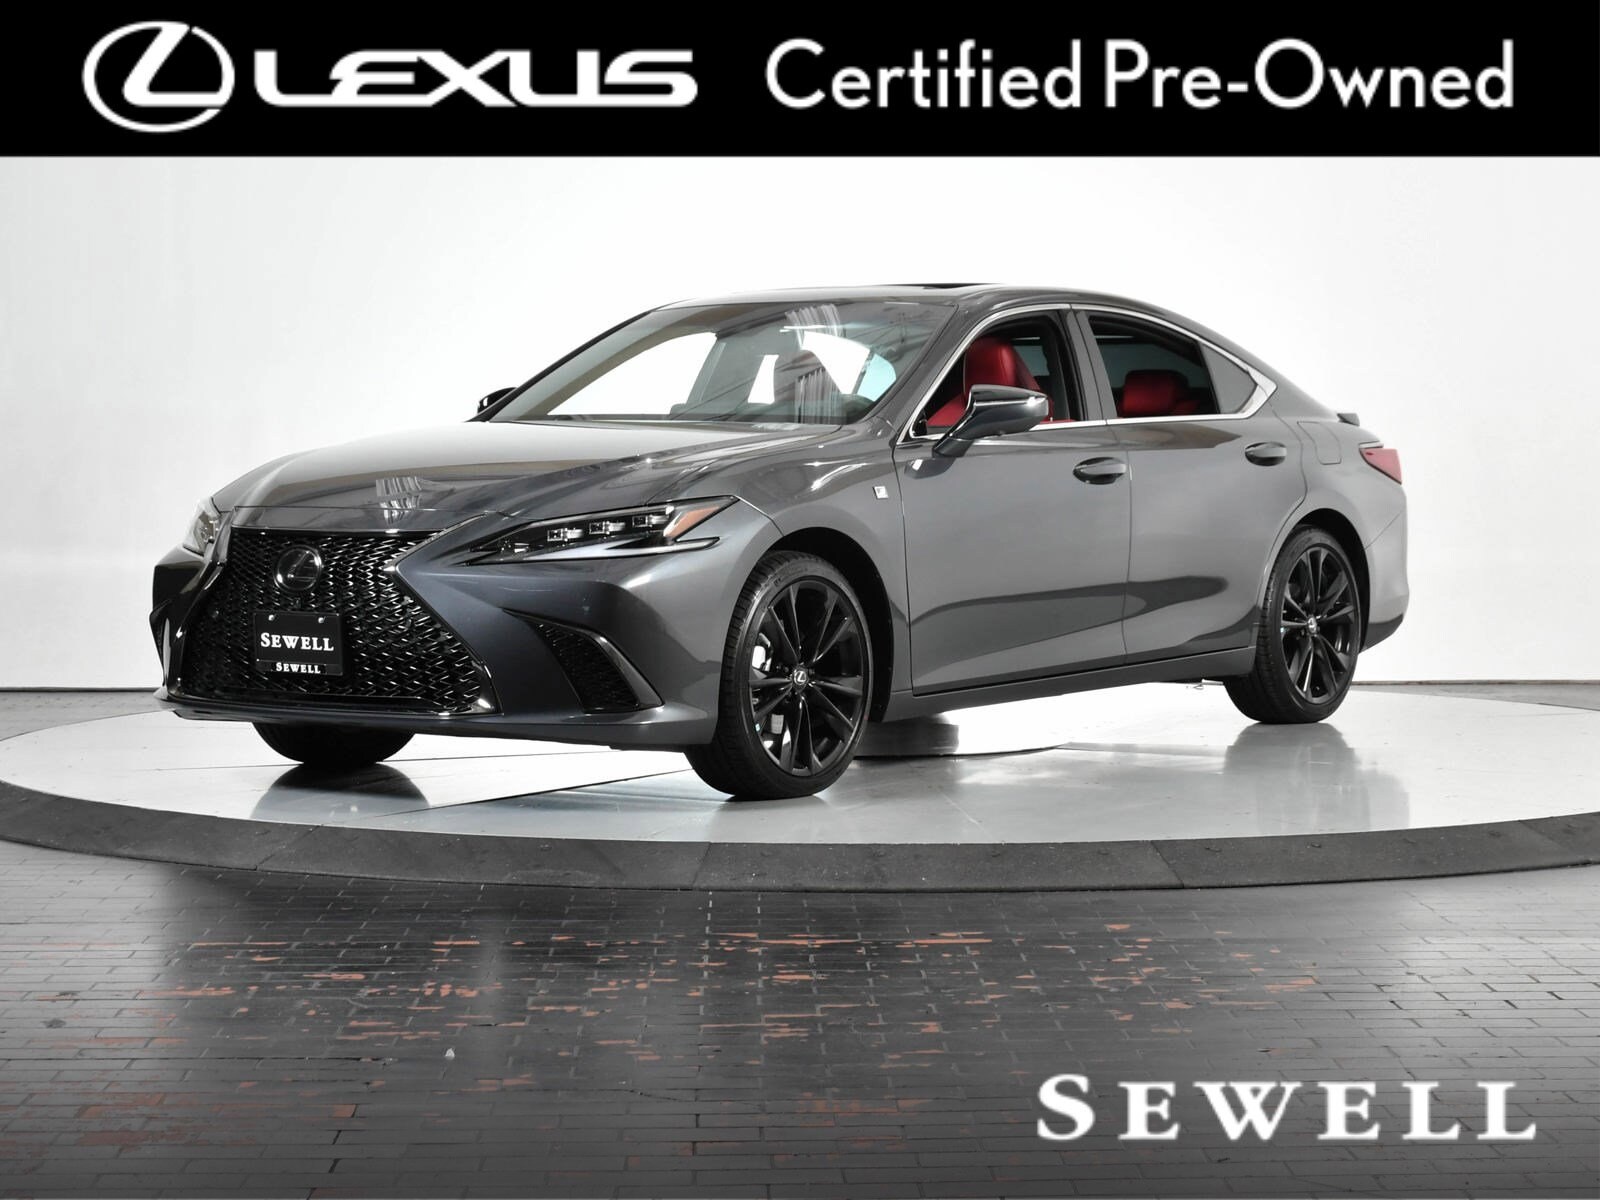 L Certified Inventory | Sewell Lexus of Dallas